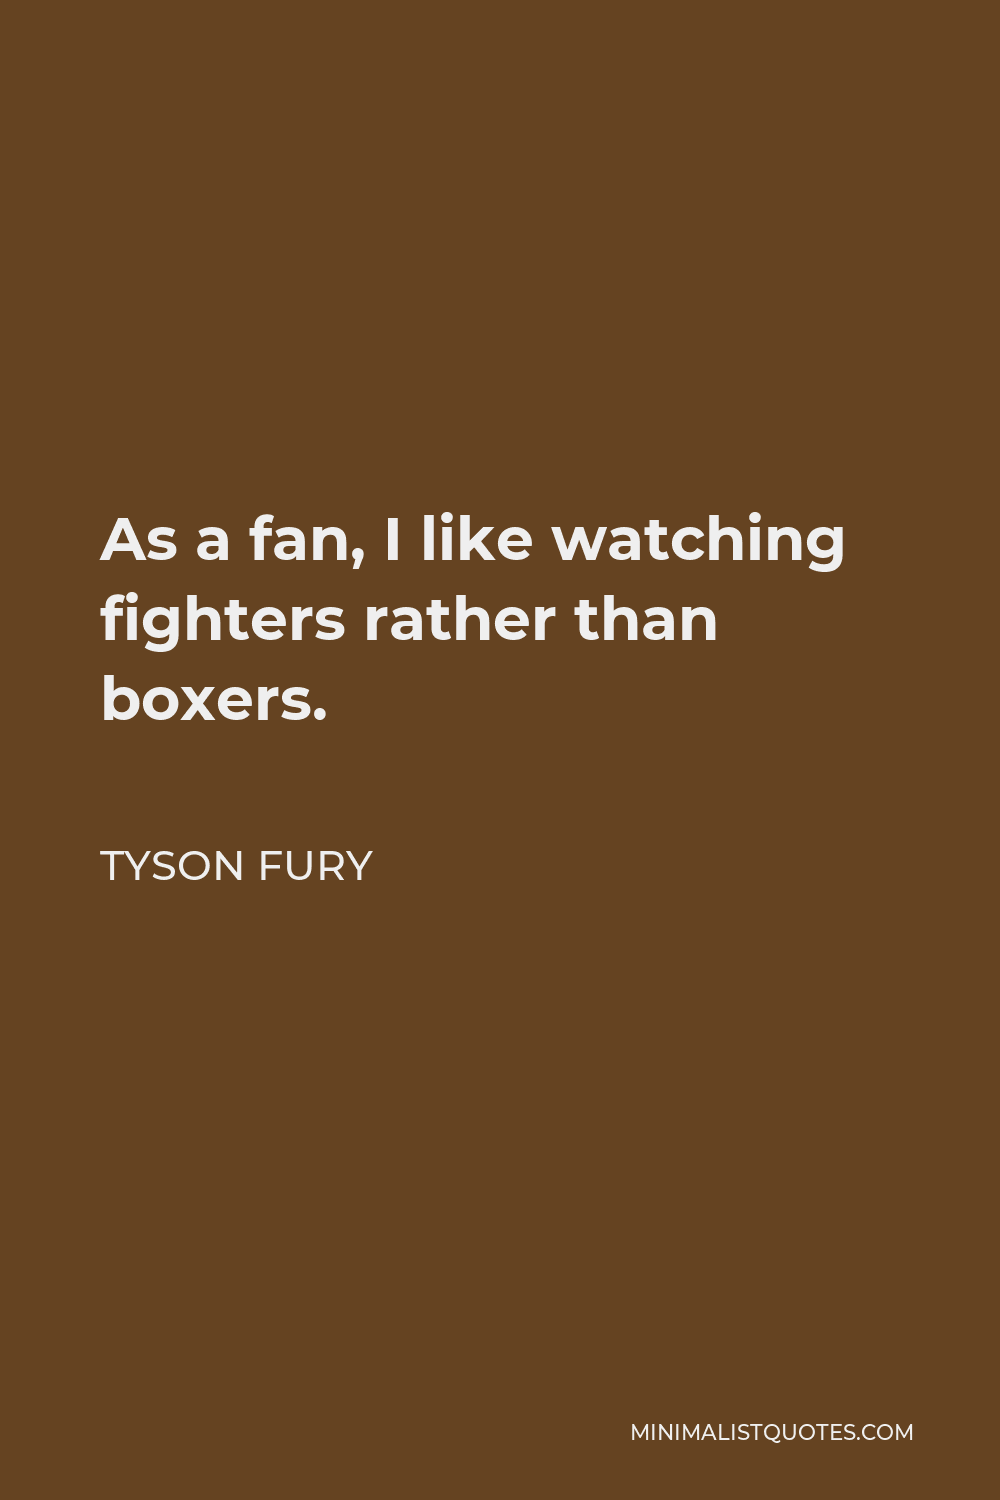 Tyson Fury Quote - As a fan, I like watching fighters rather than boxers.